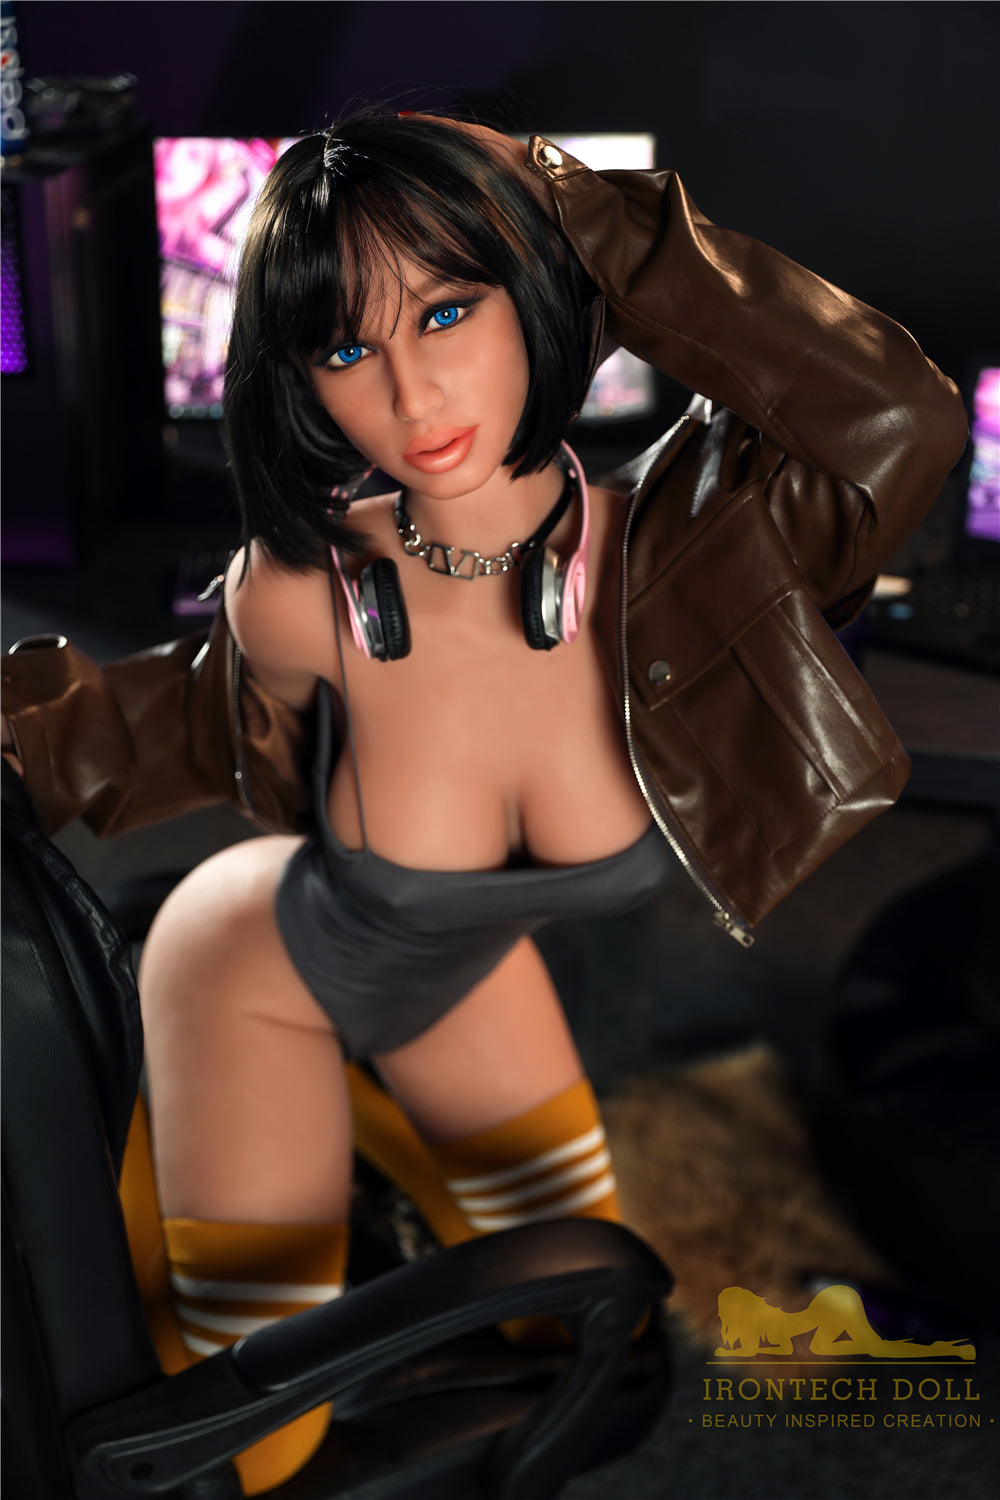 Irontech - Realistic Sex Doll - 5ft 6in (167cm) - Ruby - Love Dolls 4U